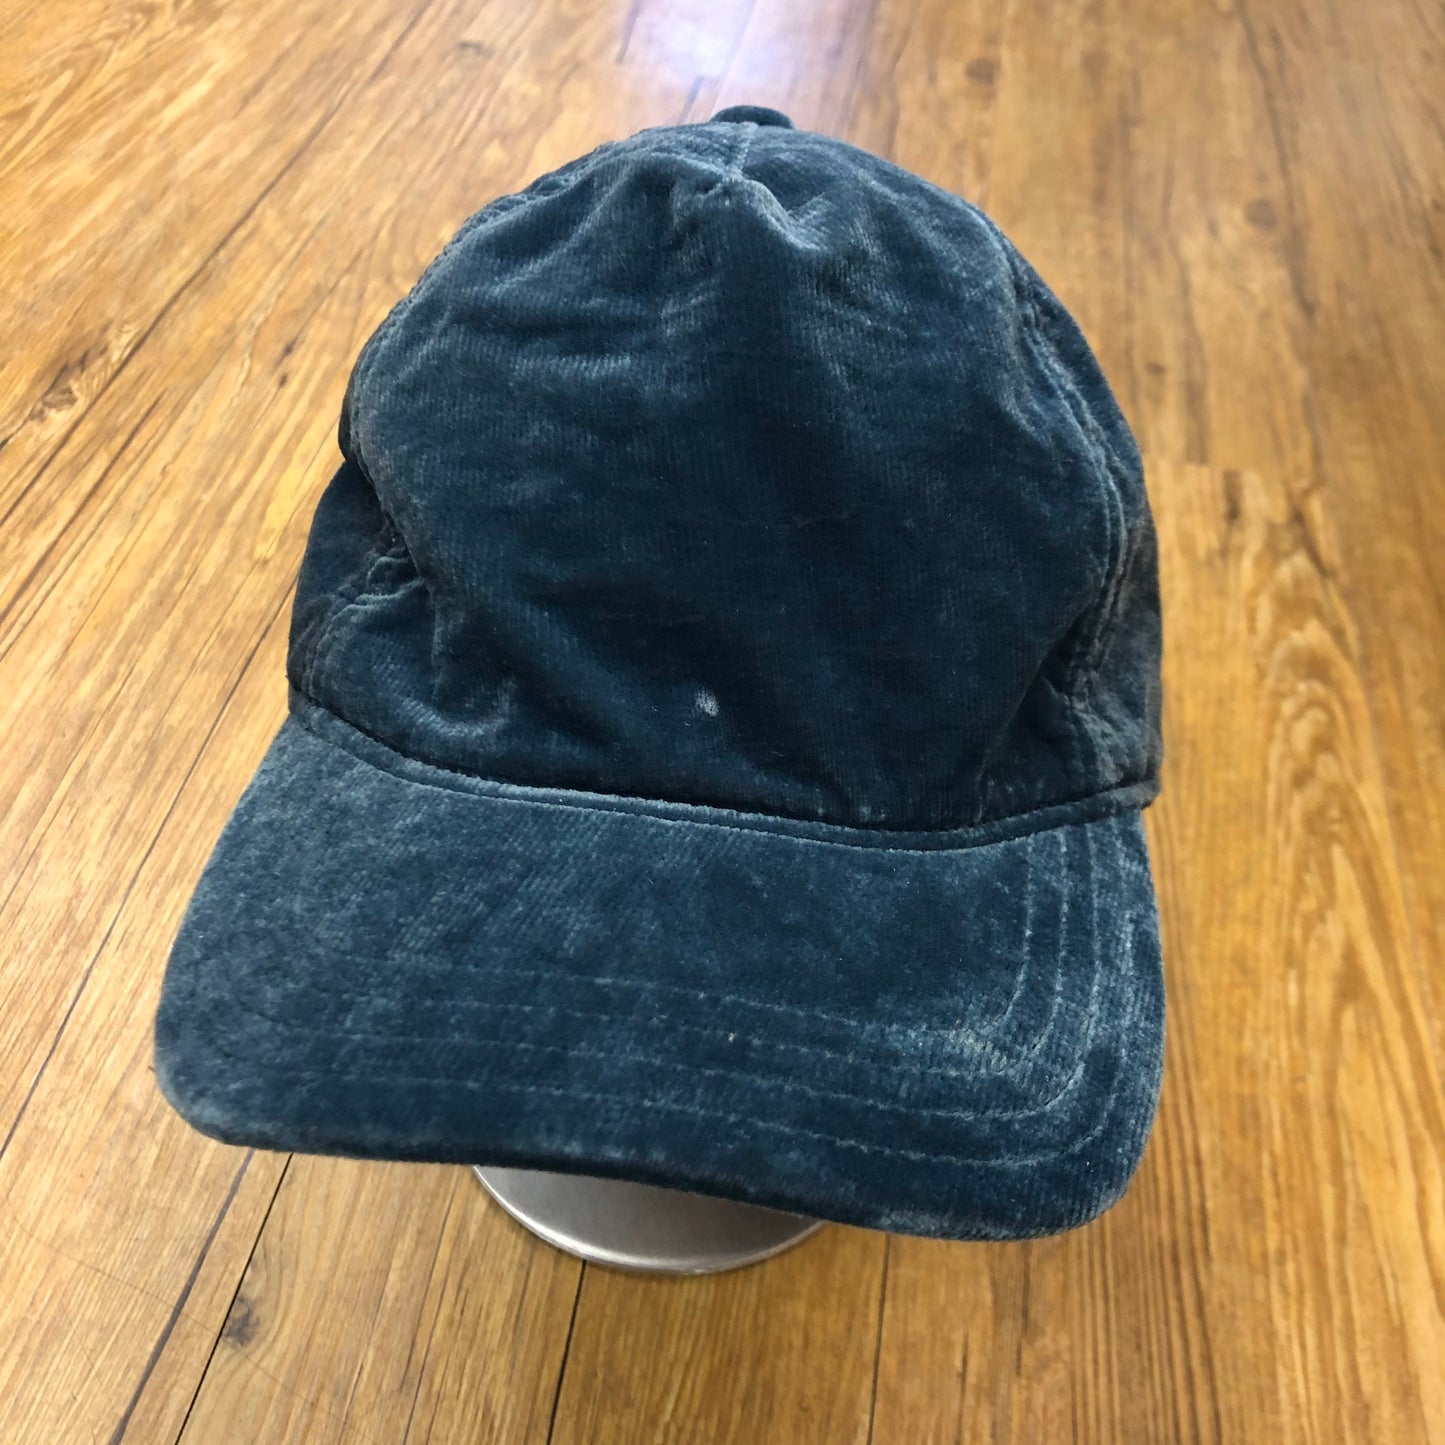 Teal Velour Camp Hat NEW!